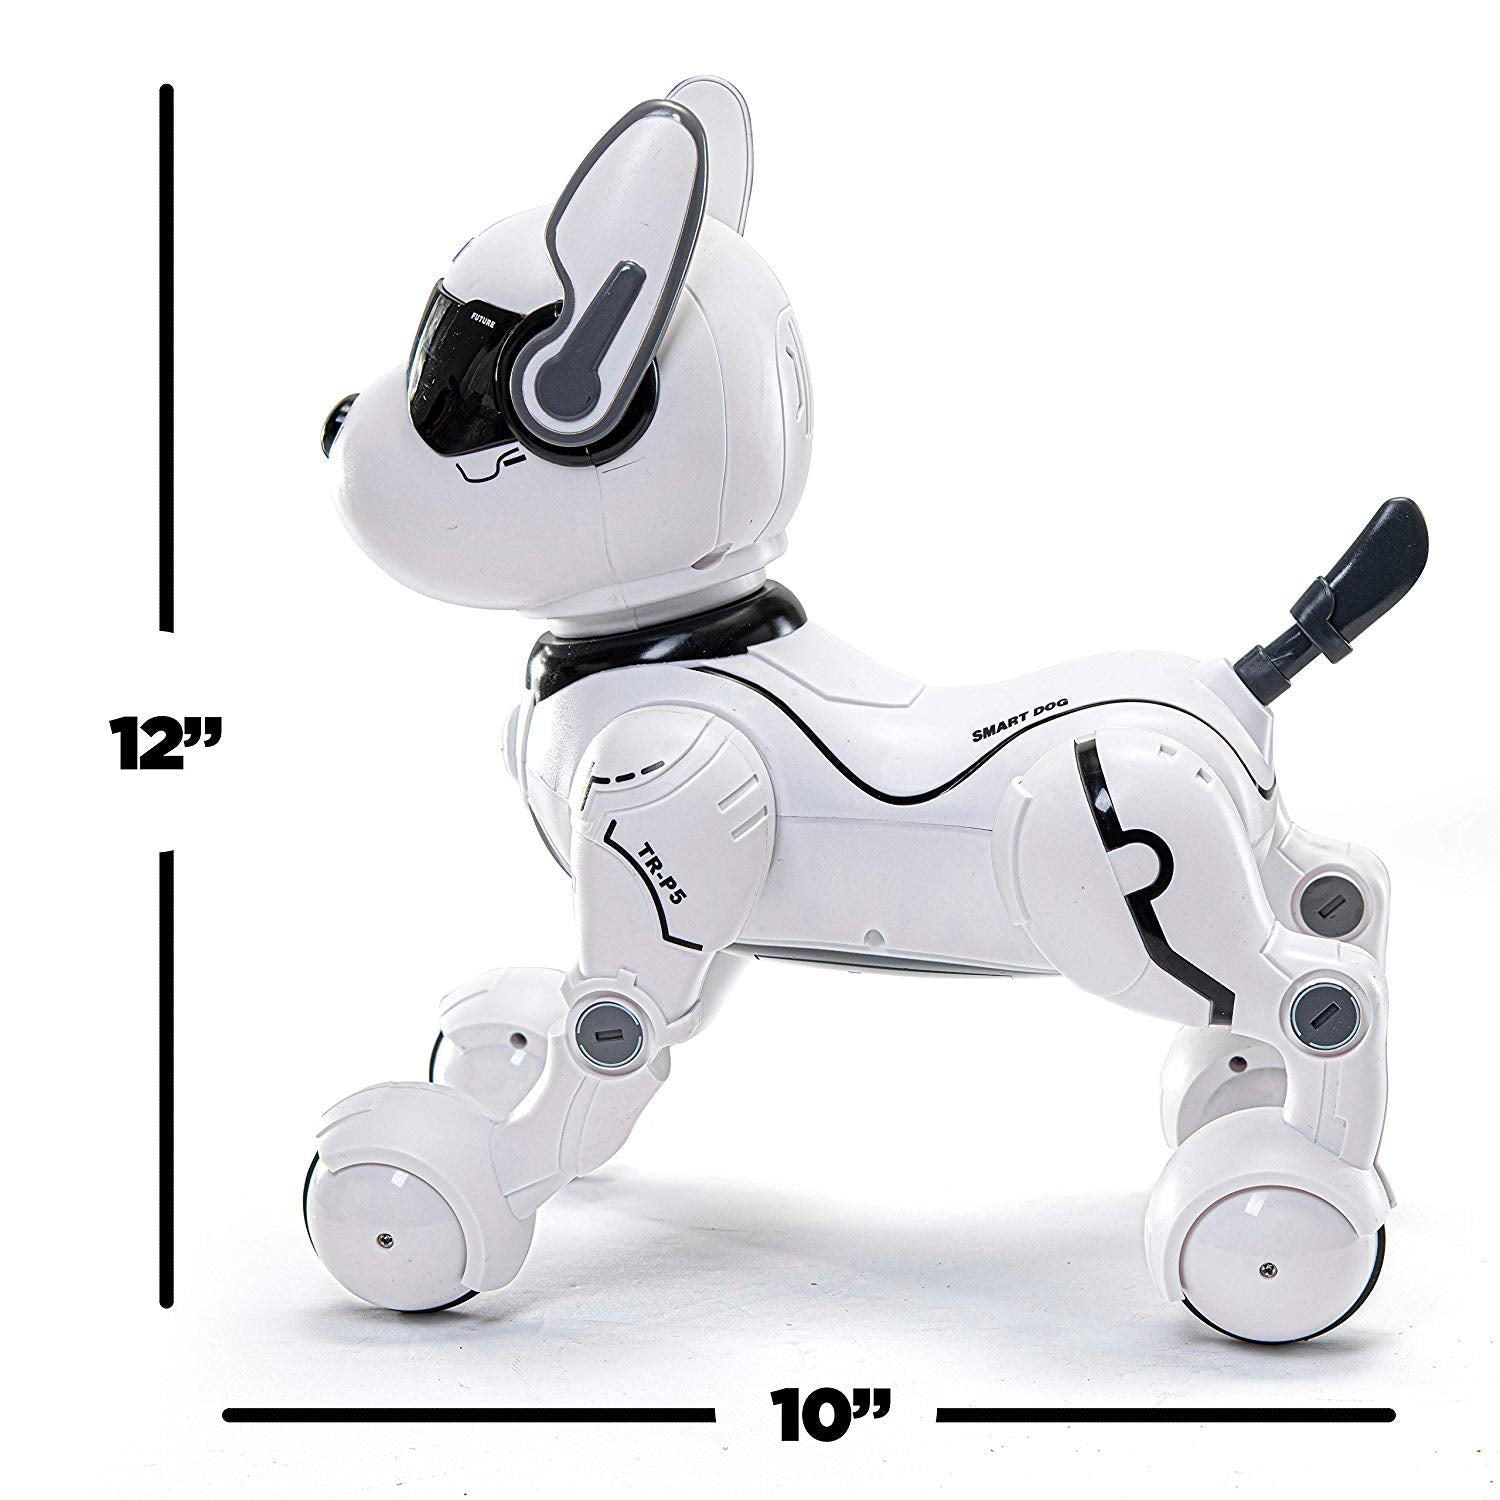 Remote Control Robot Dog Toy, Robots for Kids, Rc Dog Robot Toys for Kids 3,4,5,6,7,8,9,10 Year Old and up, Smart & Dancing Robot Toy, Imitates Animals Mini Pet Dog Robot…